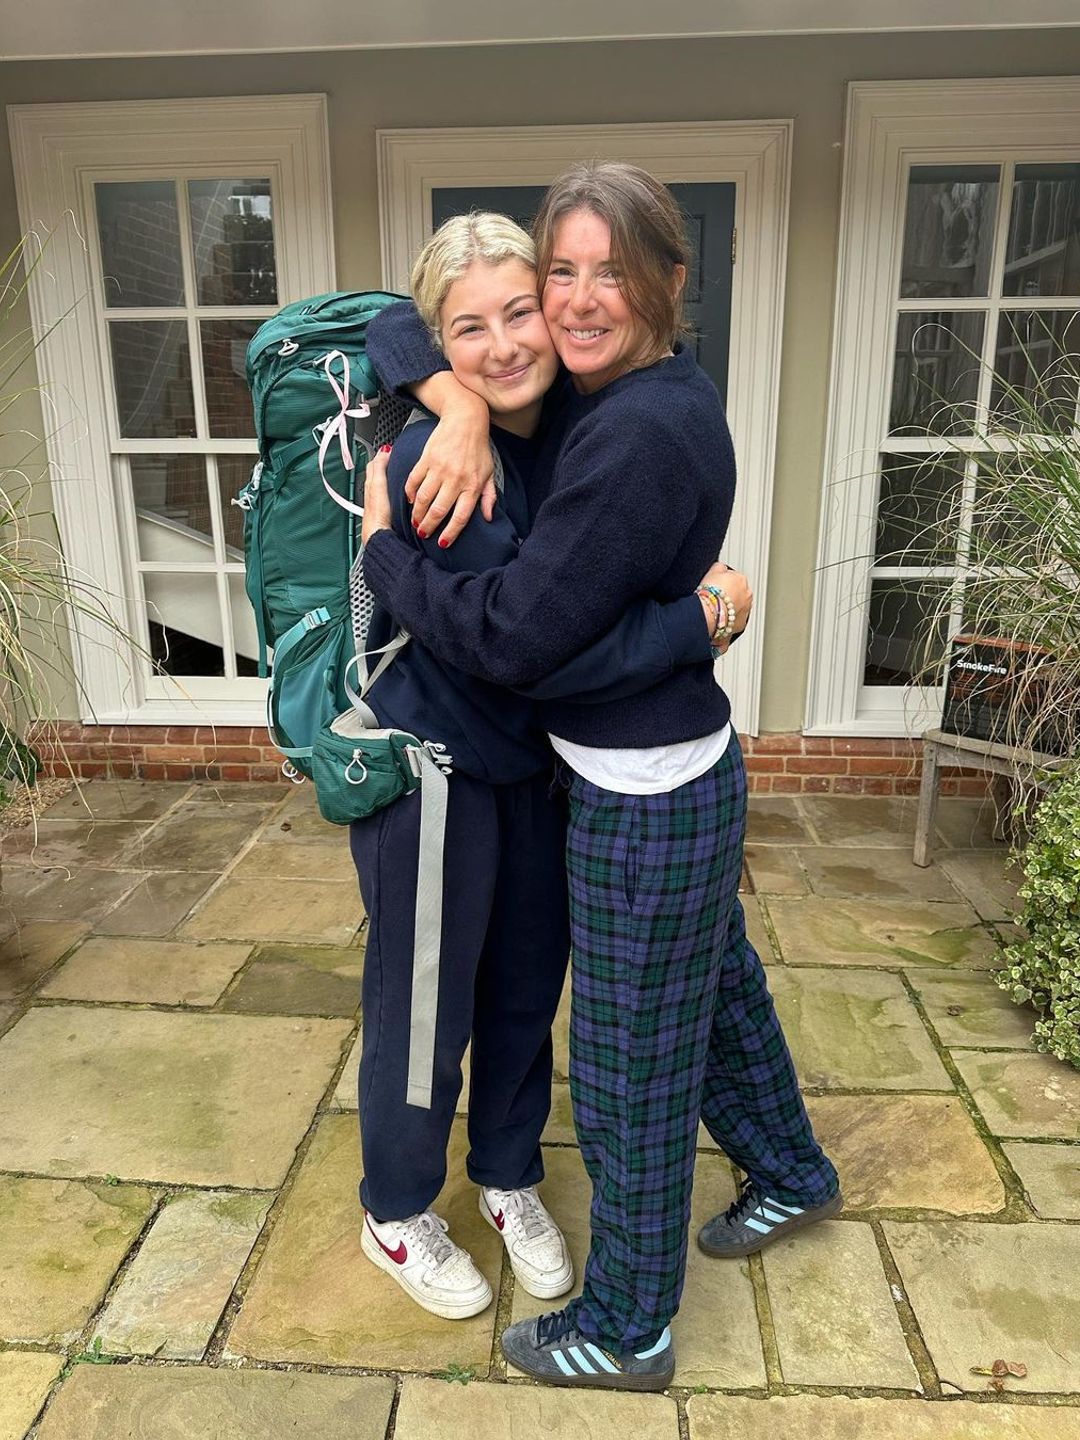 Jools Oliver hugging daughter Poppy tightly as she headed to the airport